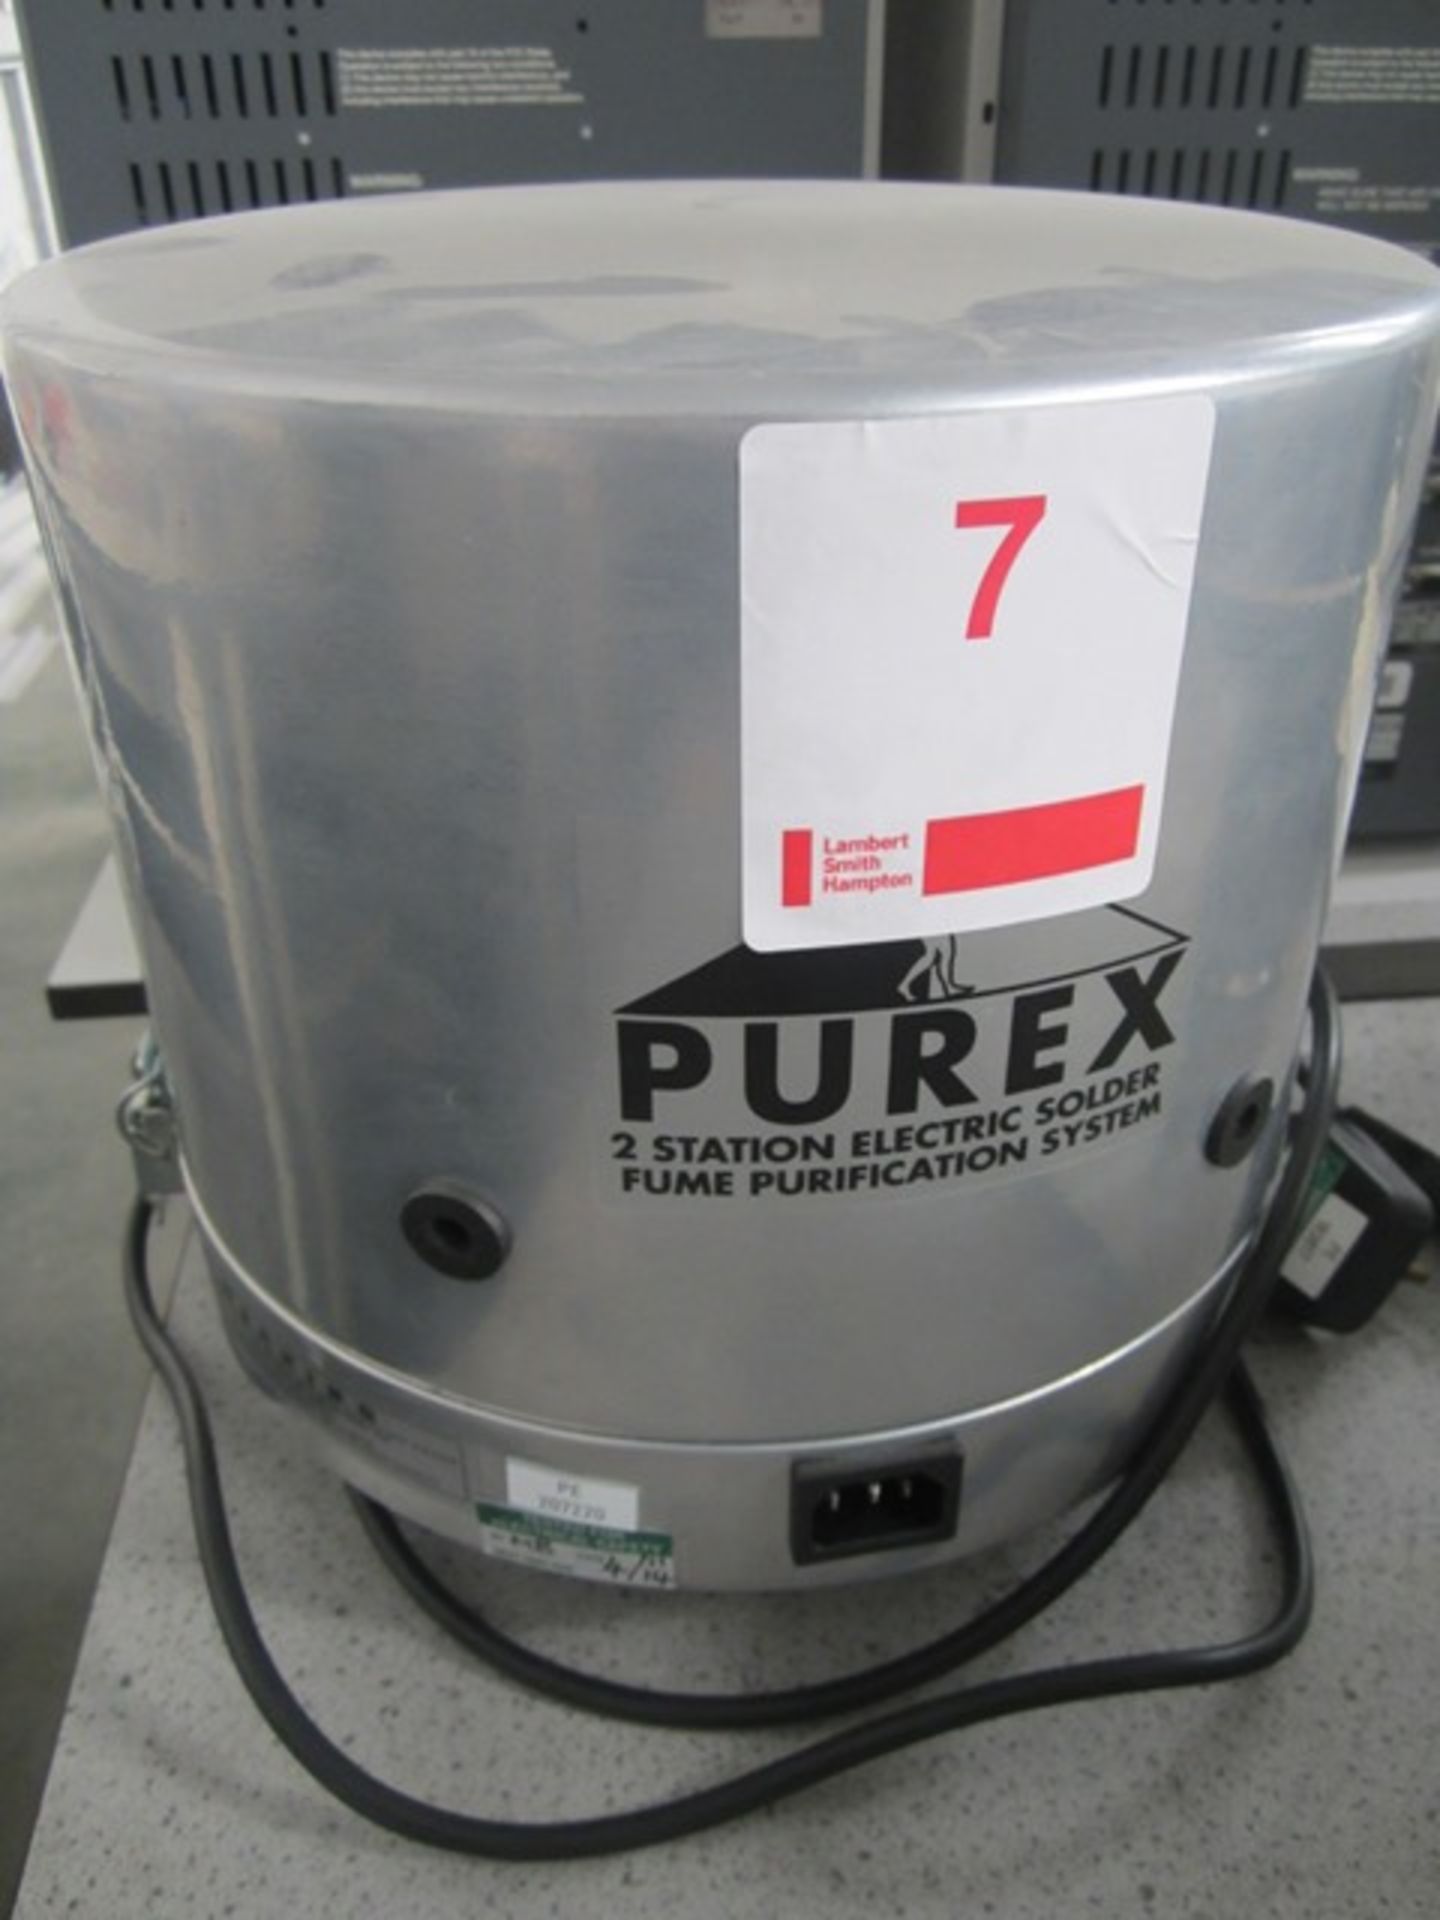 Purex  2 station electric fume purification system (height 50mm x width 75mm x depth 170mm)